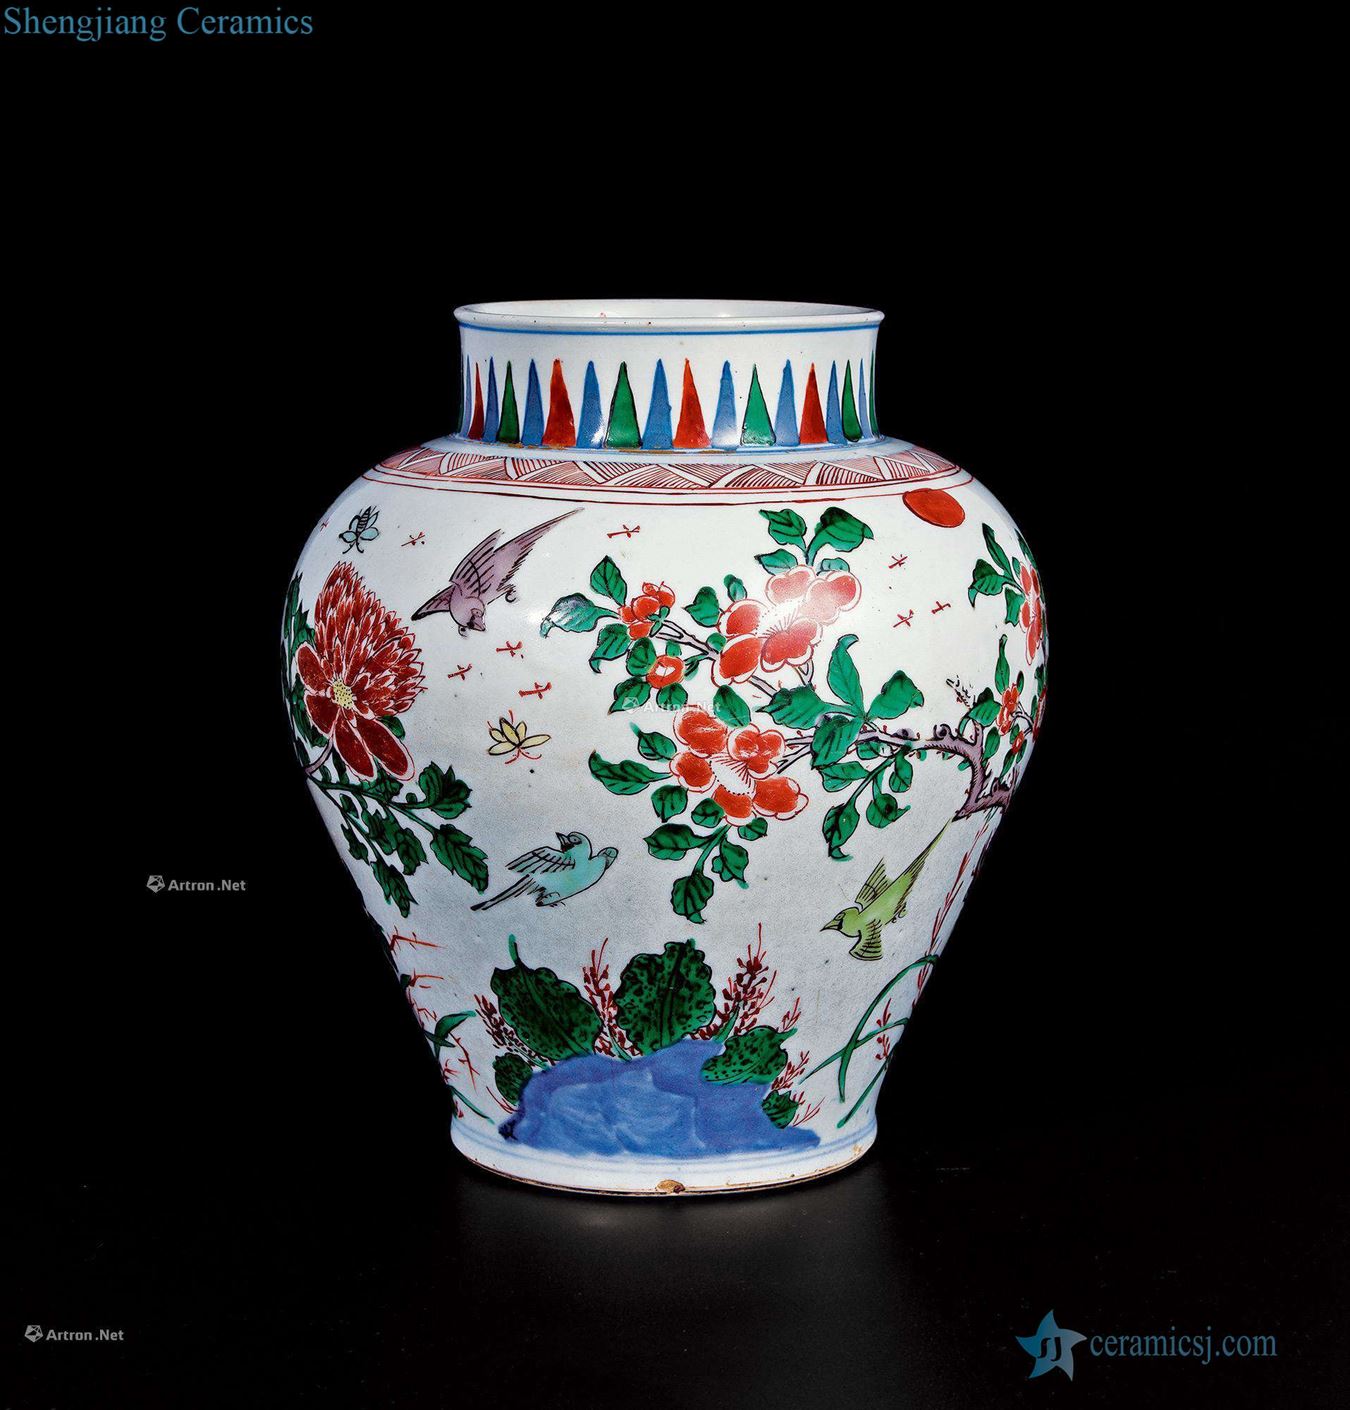 In the early qing Colorful flowers and birds show the canister